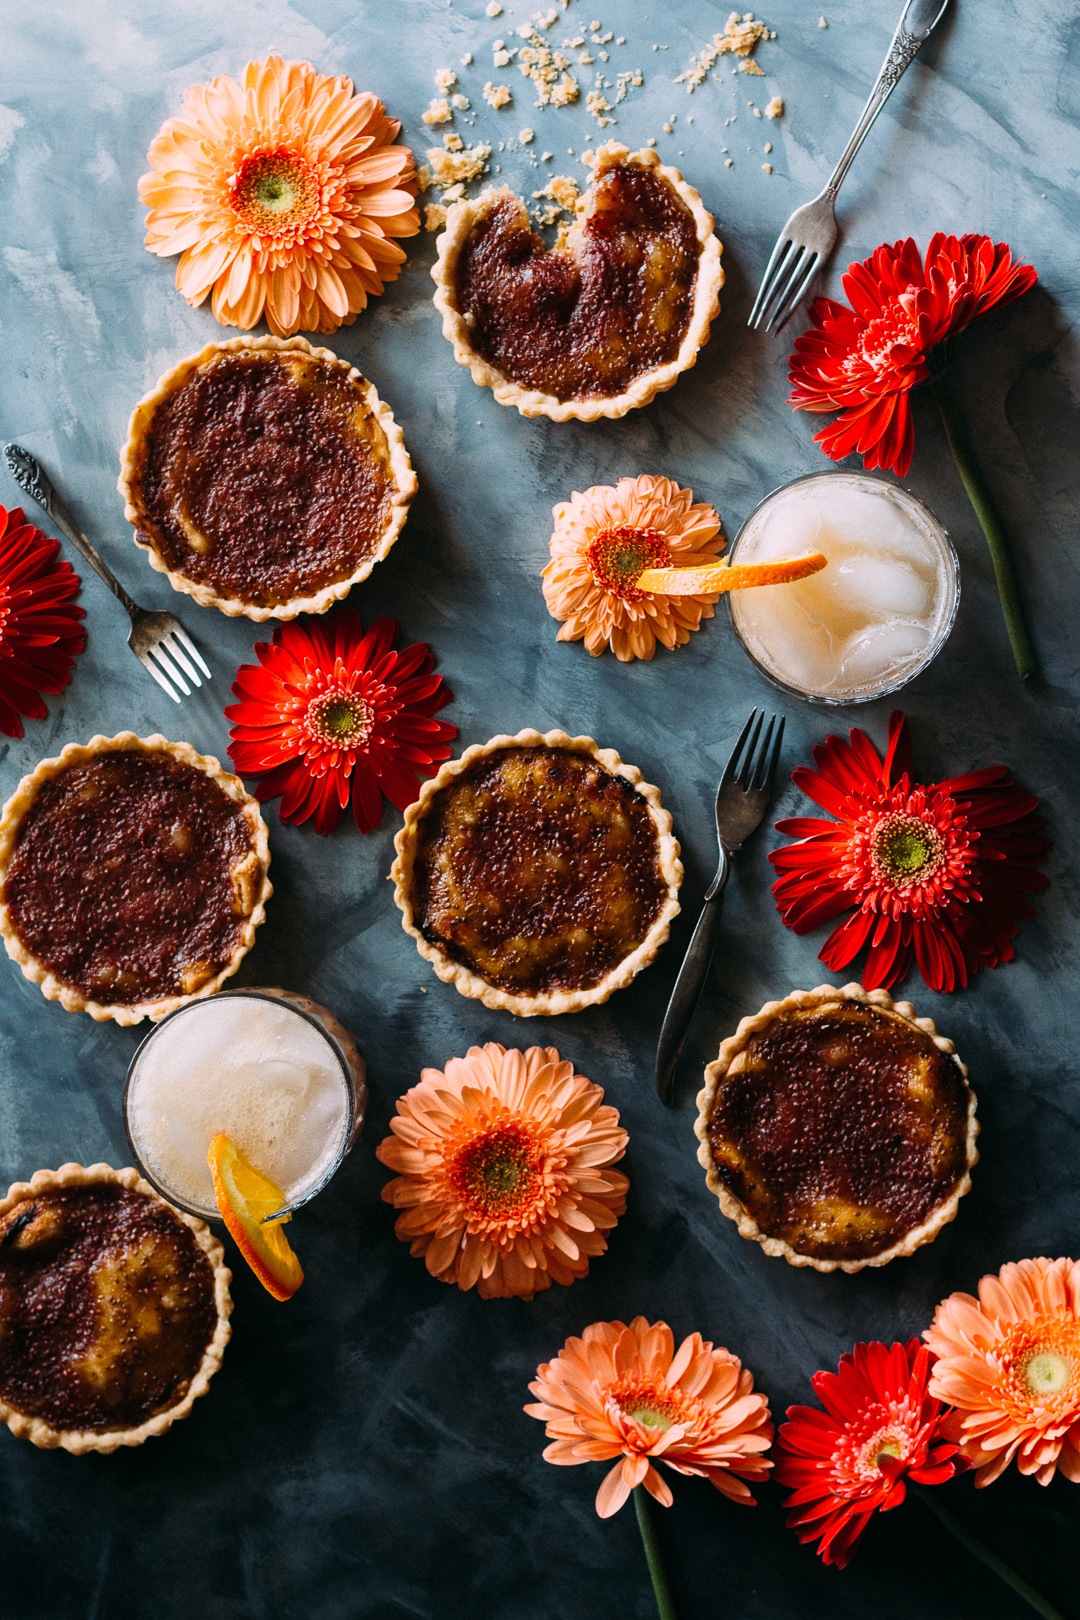 Over head shot of 6 rhubarb tarts spread out and surrounded by flowers, forks, and two drinks with orange slices in them.